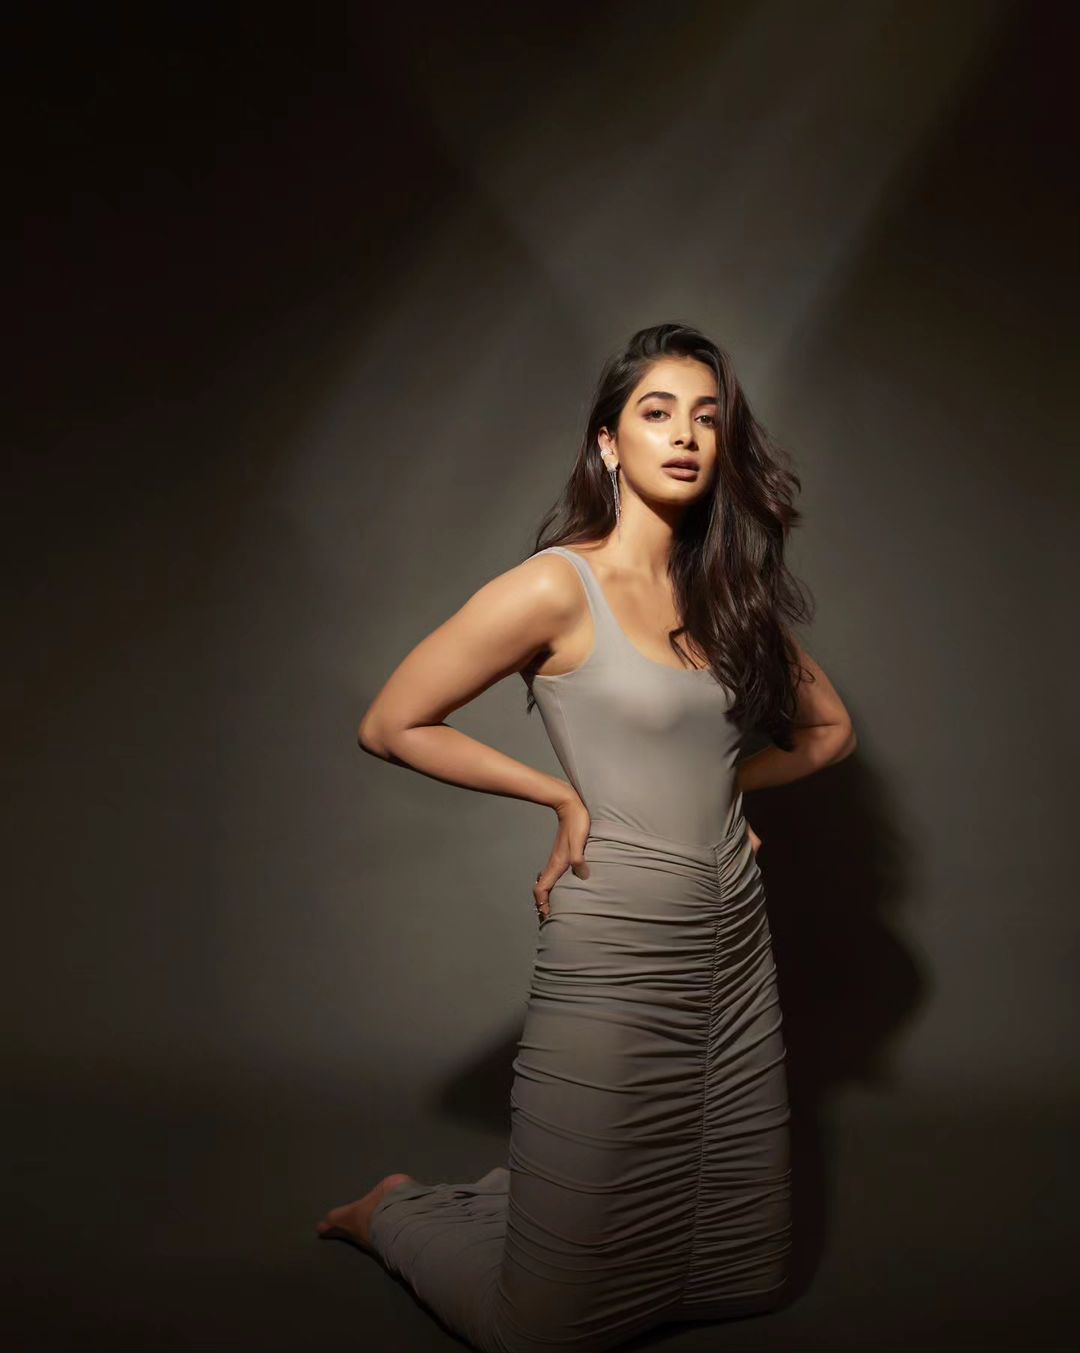 pooja-hegde-glamours-looks-in-amazing-tight-fit-dress